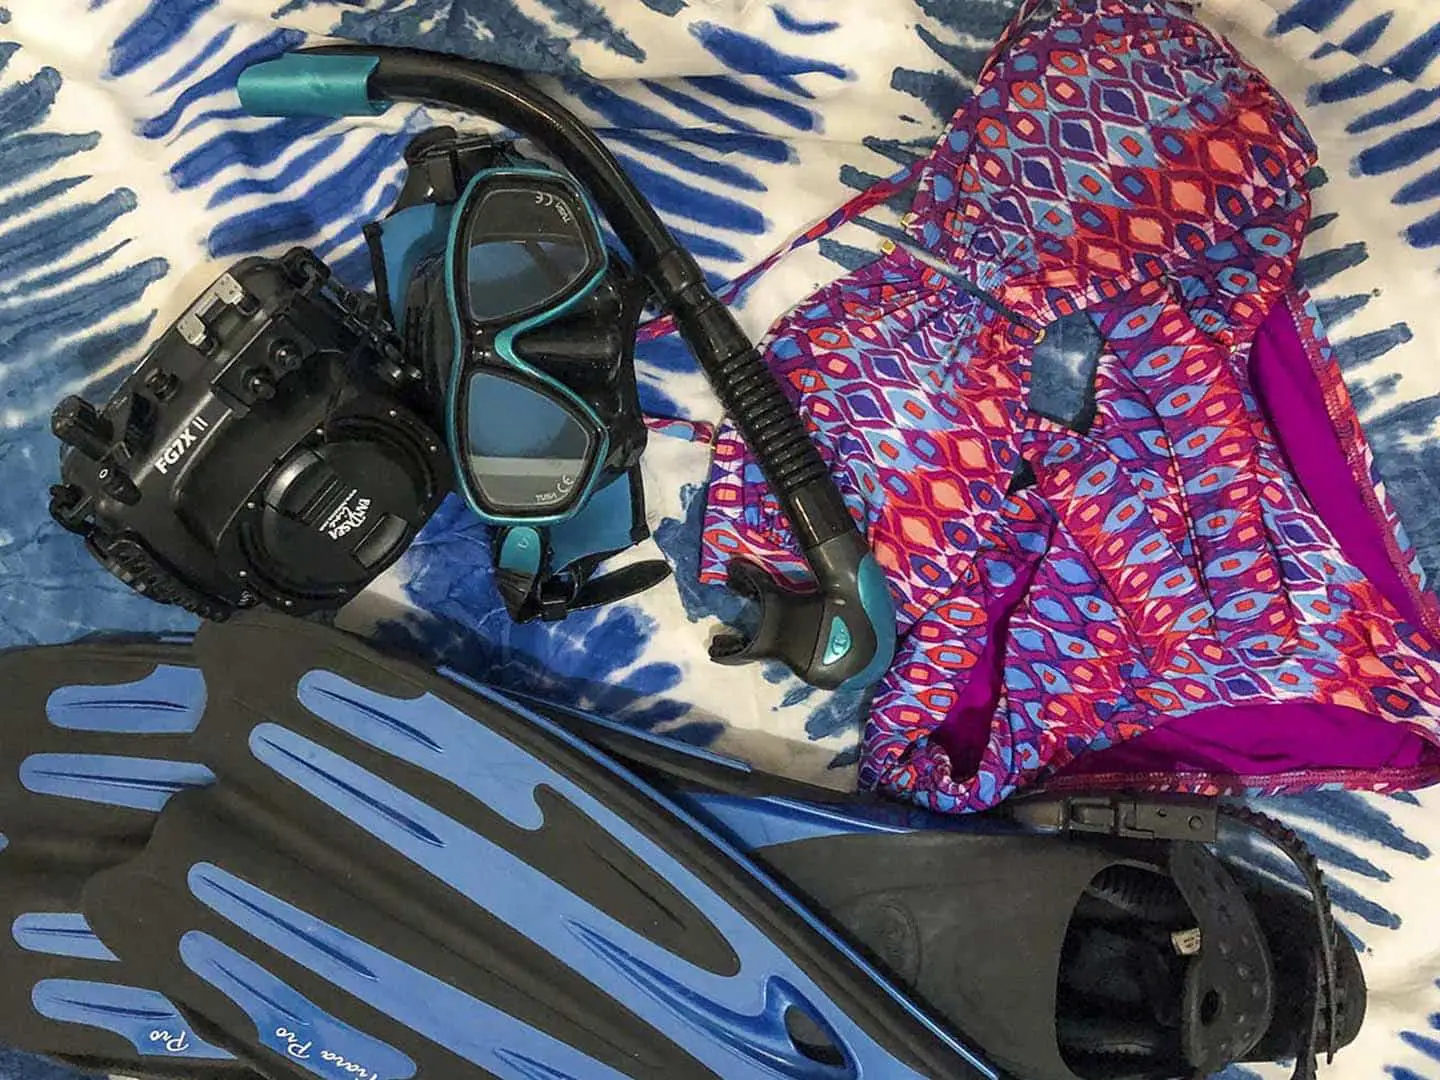 Philippines Packing List Travel and Diving Essentials: Bikini, Mask and Snorkel, Fins and Underwater Camera! 